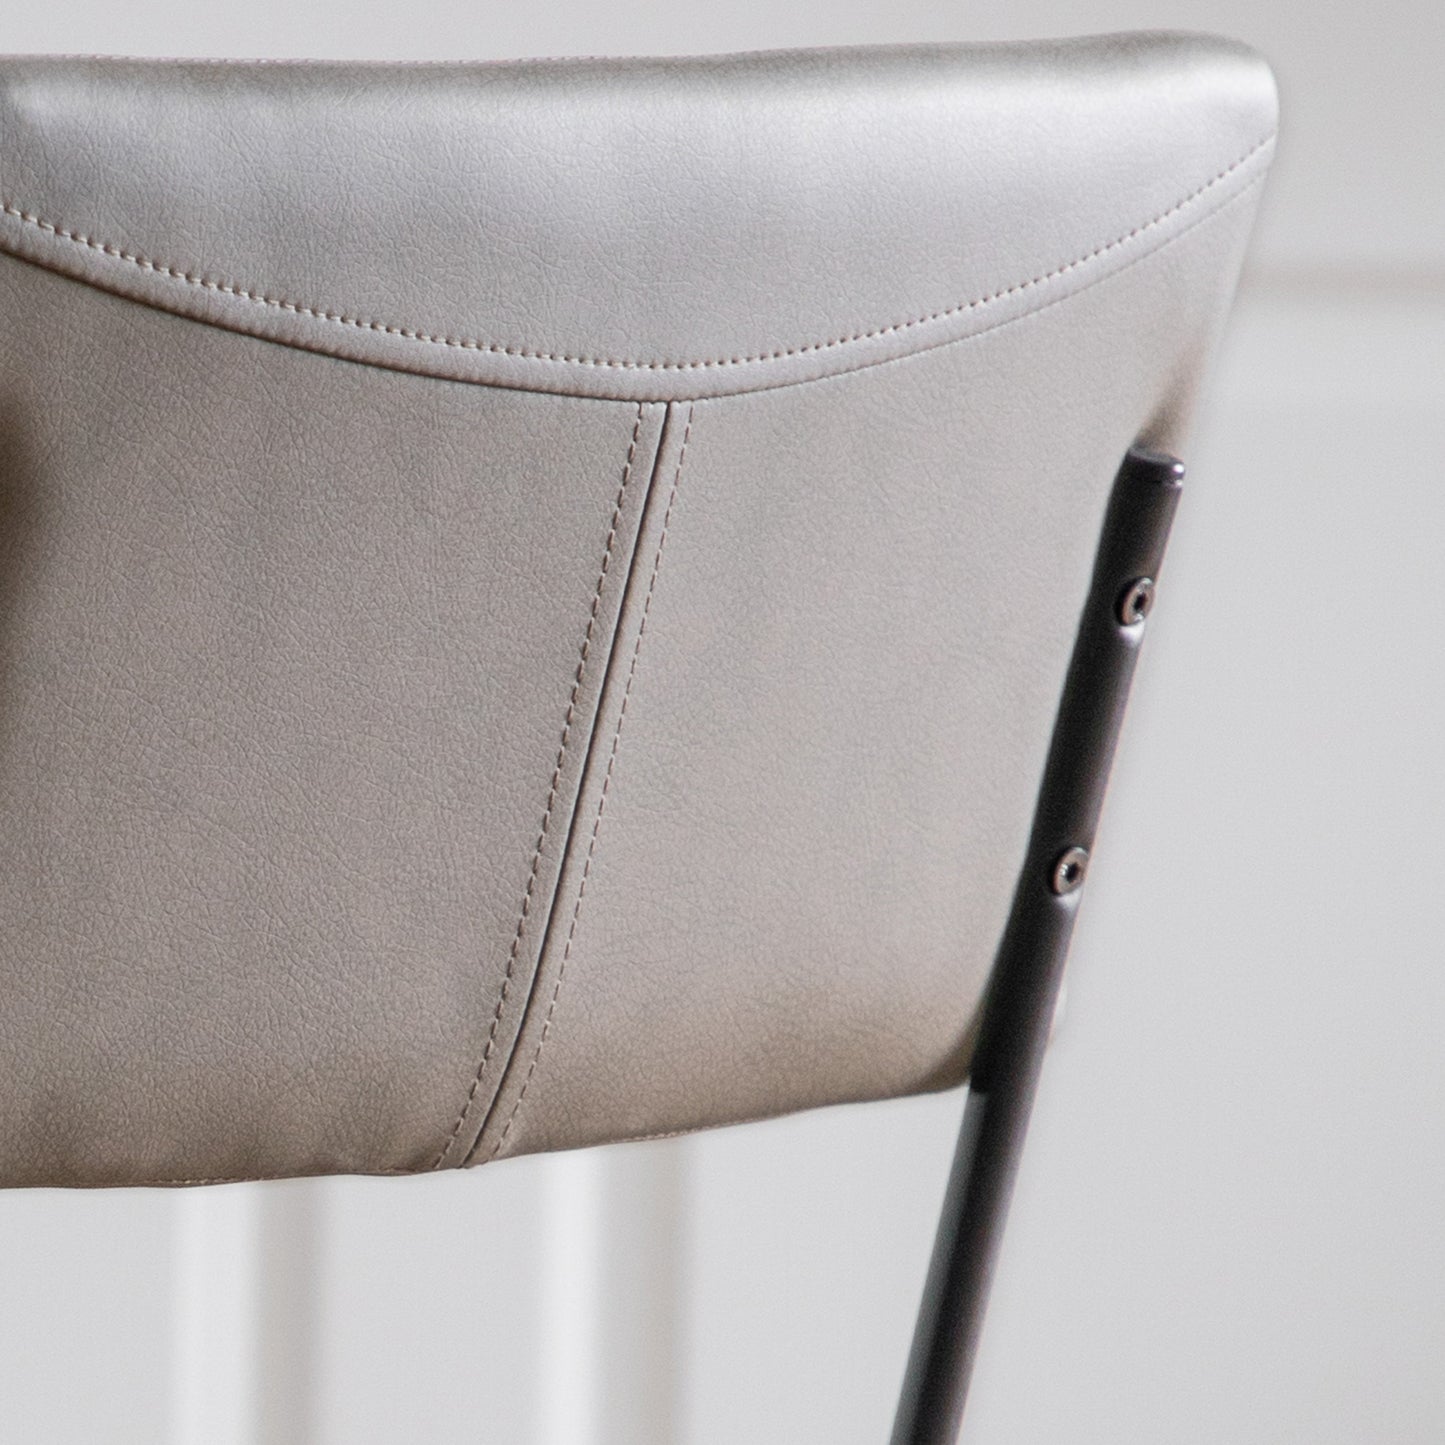 A close up of a Chivelstone Dining Chair Silver Grey (2pk) by Kikiathome.co.uk, perfect for interior decor and home furniture.